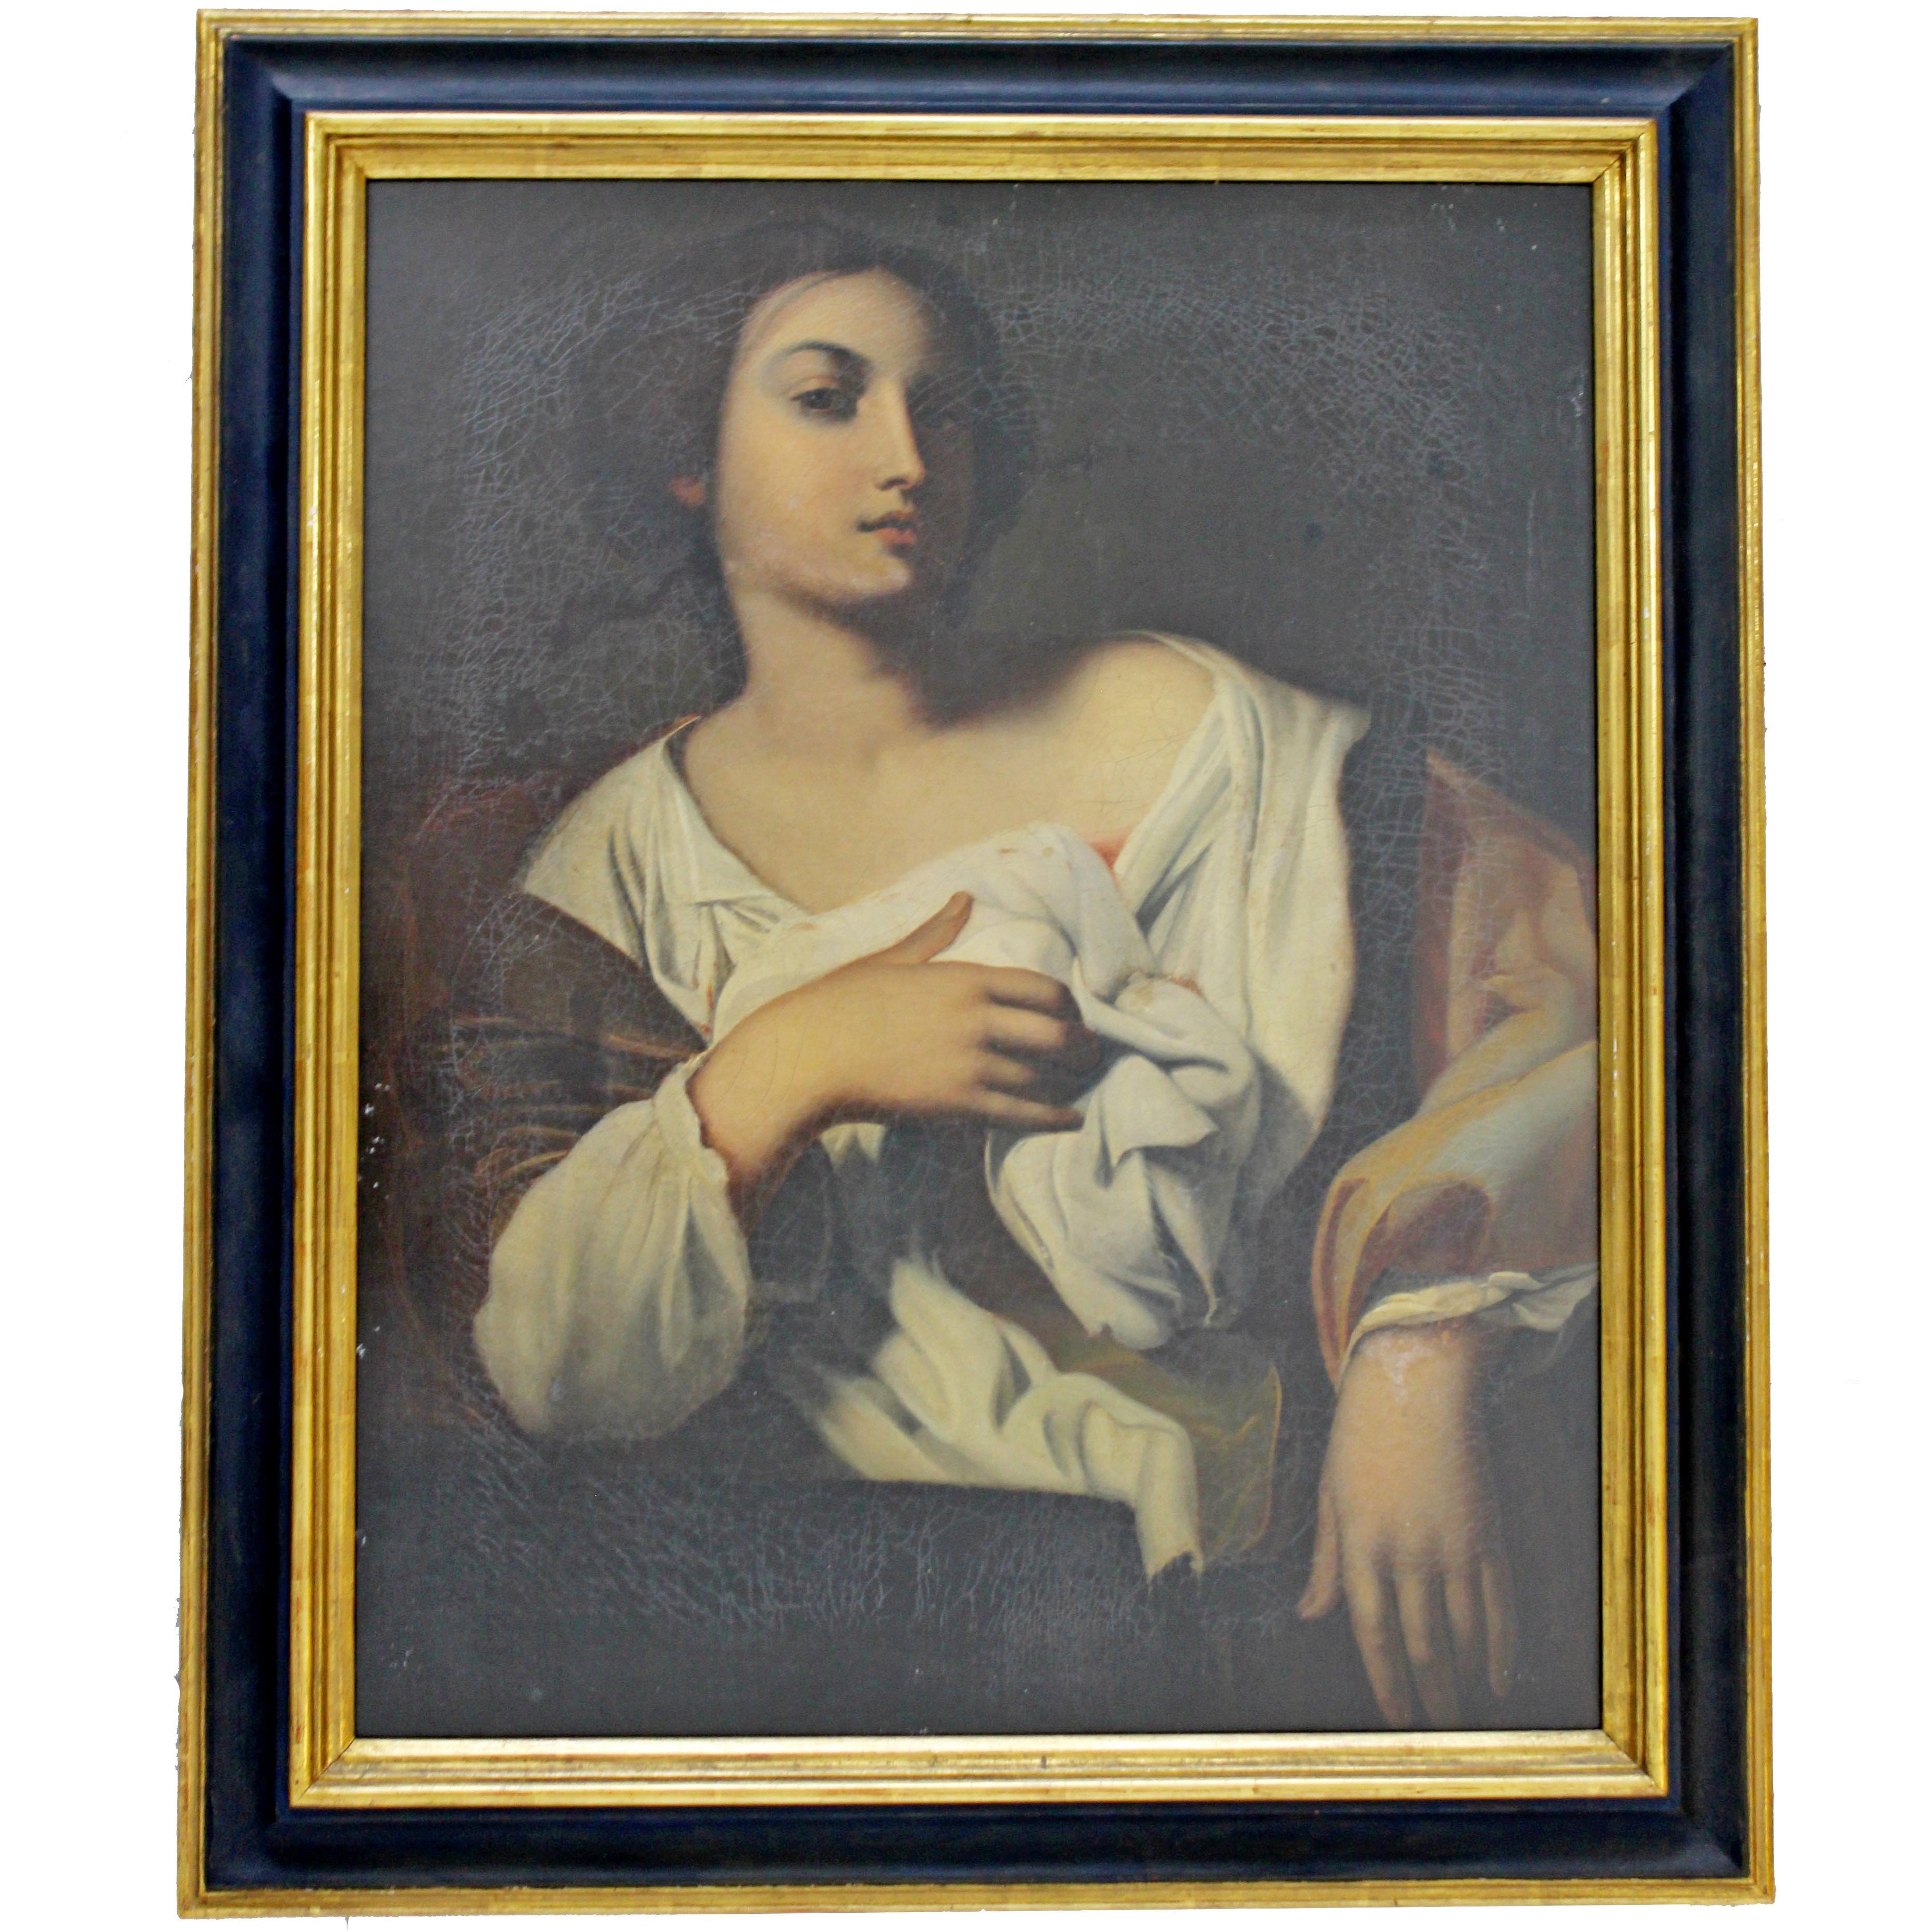 Antique Framed St. Agnes the Martyr Oil Painting 14th or 15th Century Portrait